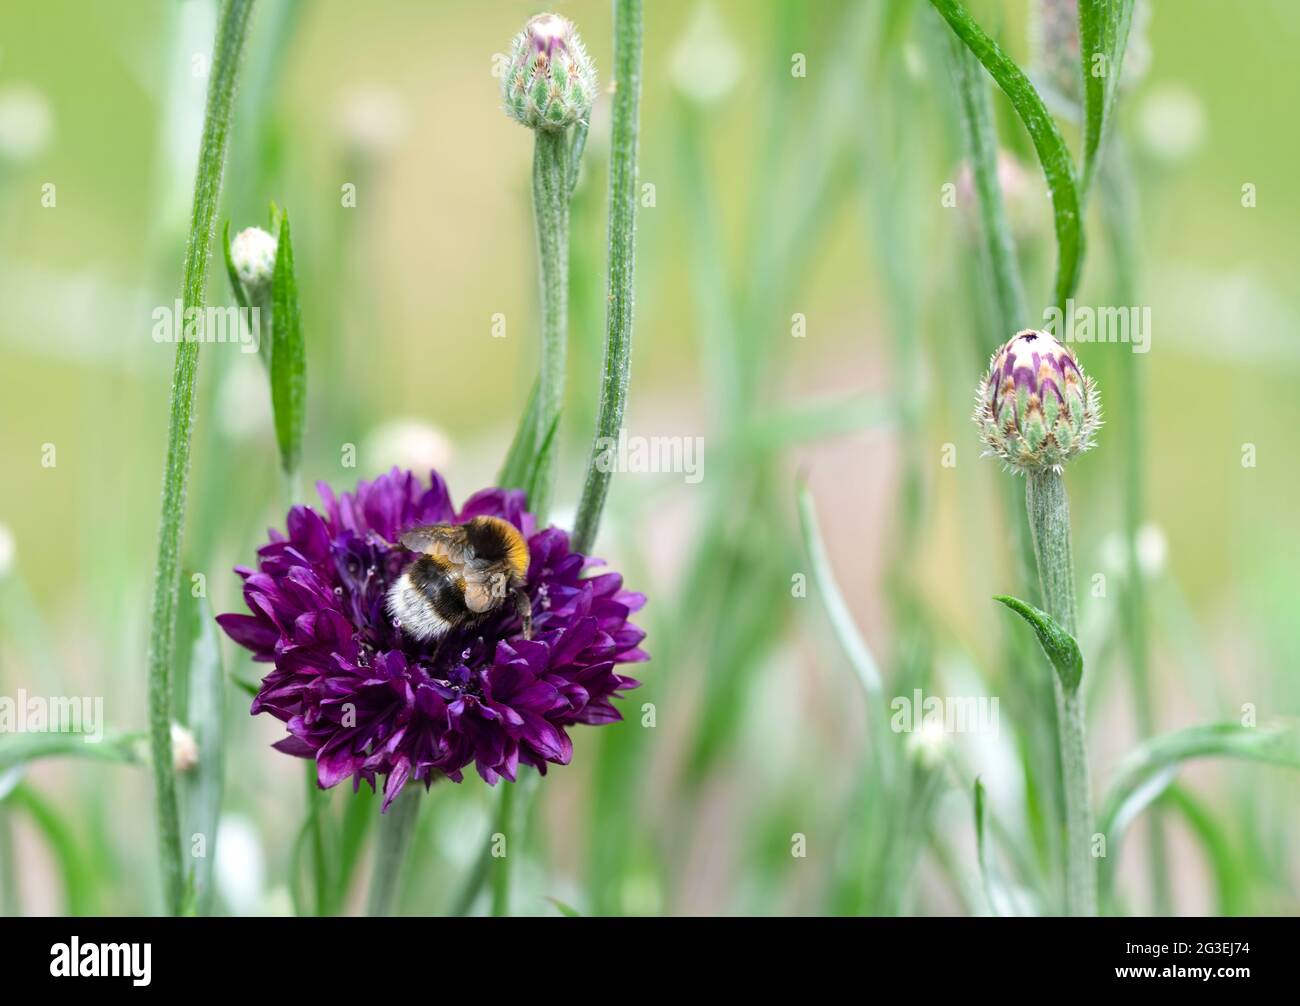 concept of bees in danger of extinction due to changes in the environment, showing a bumblebee nestled into a flower collecting pollen ,blurred backgr Stock Photo